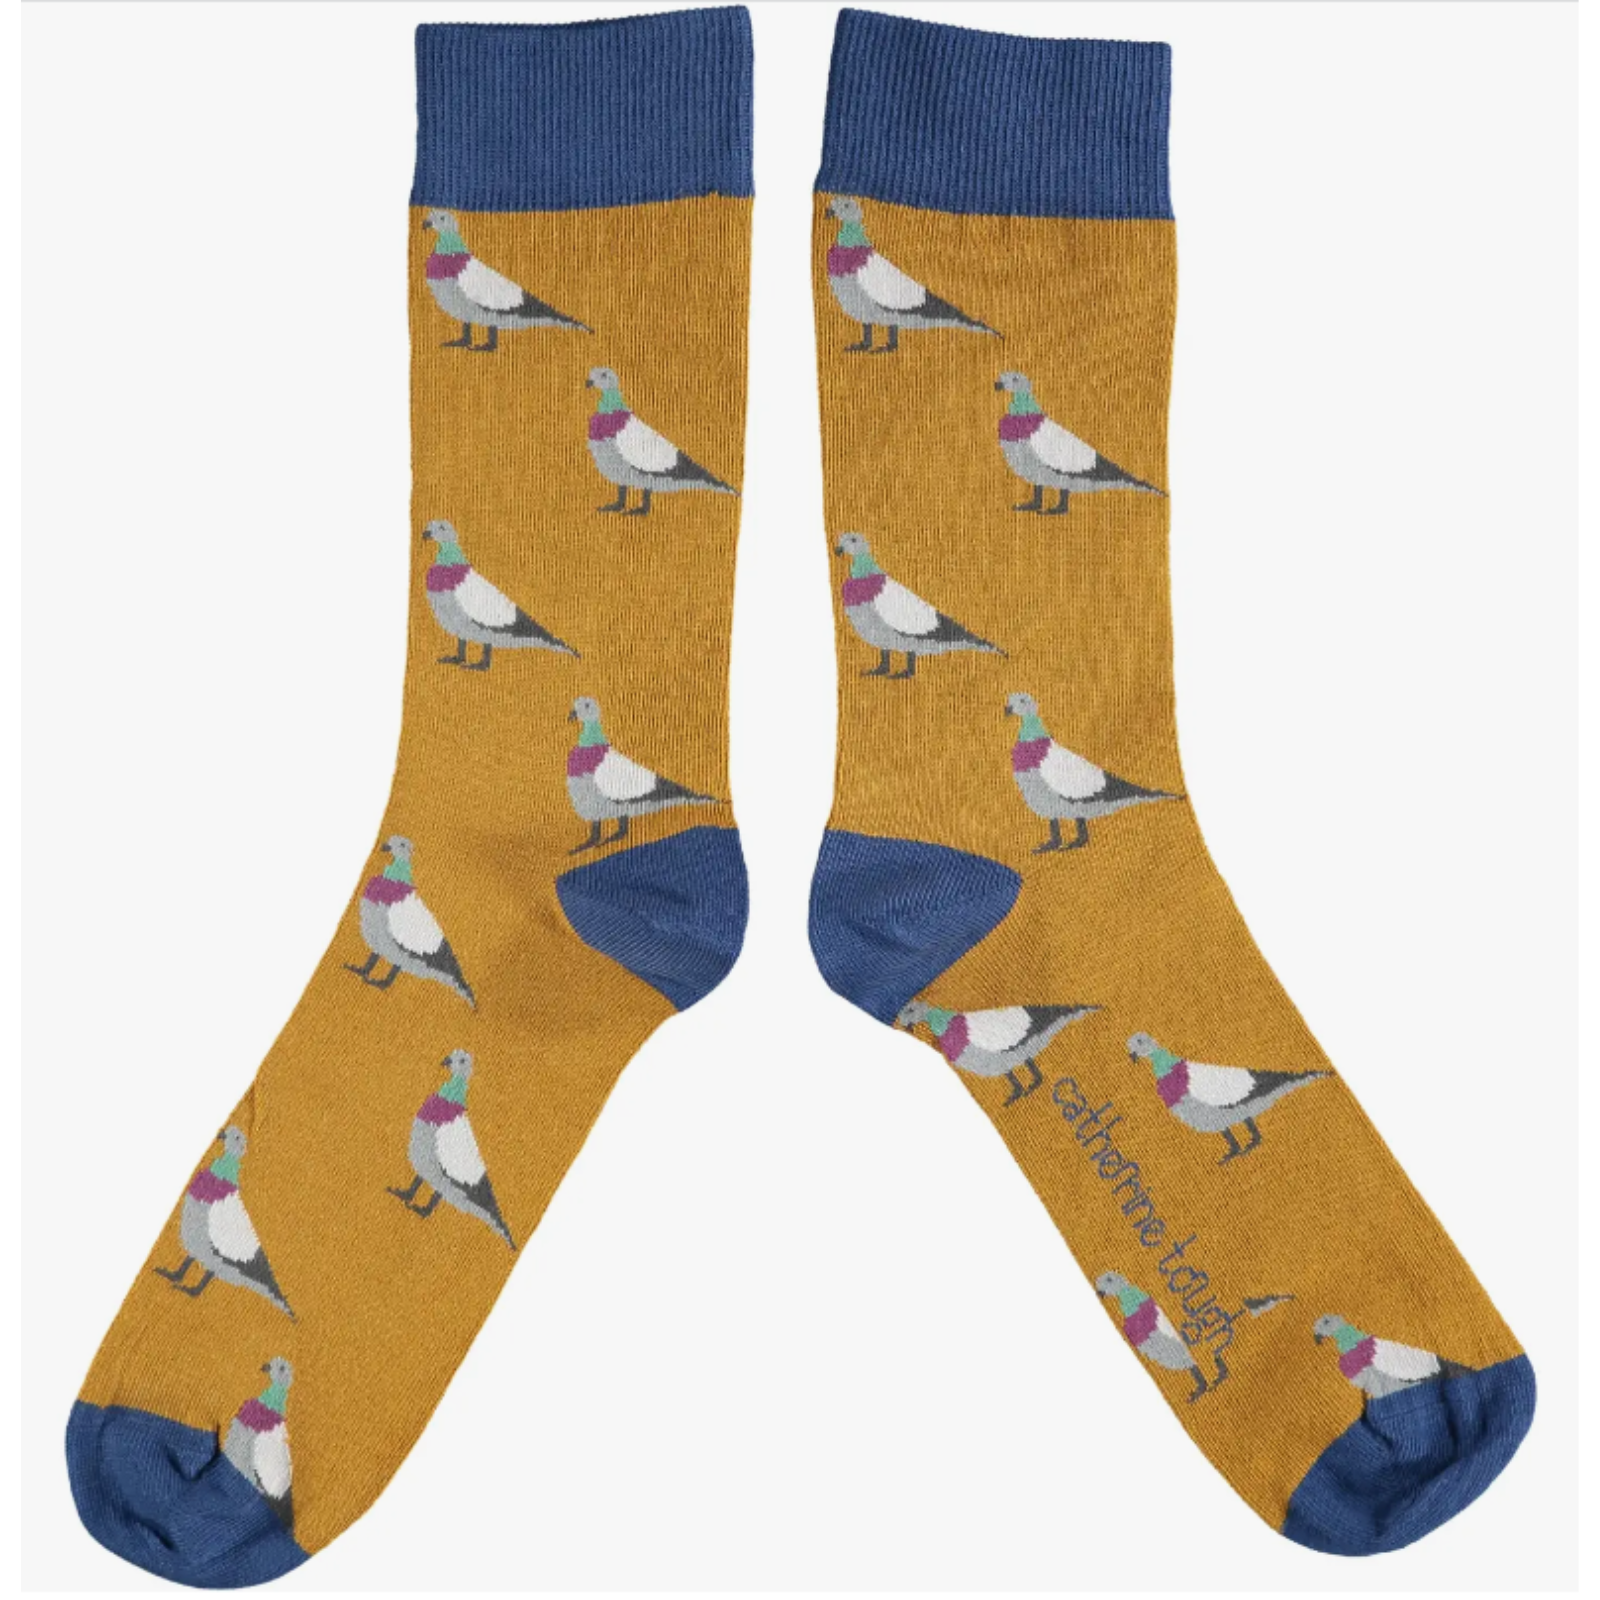 Catherine Tough men's pigeon socks design features gray pigeons on a ginger base framed with soft blue cuffs, heels & toes